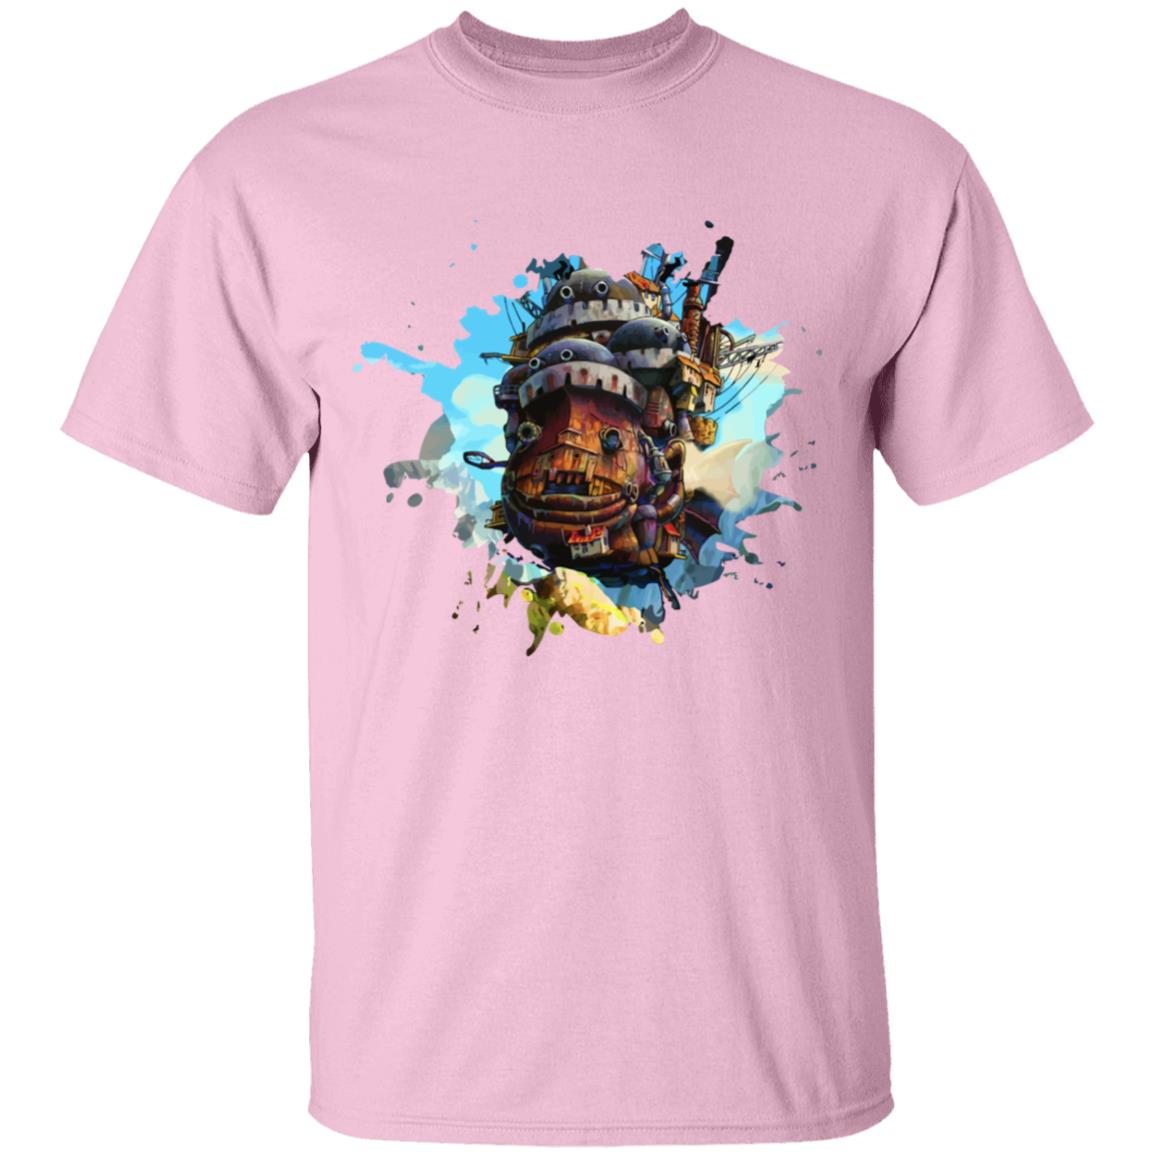 Howl’s Moving Castle Painting T Shirt